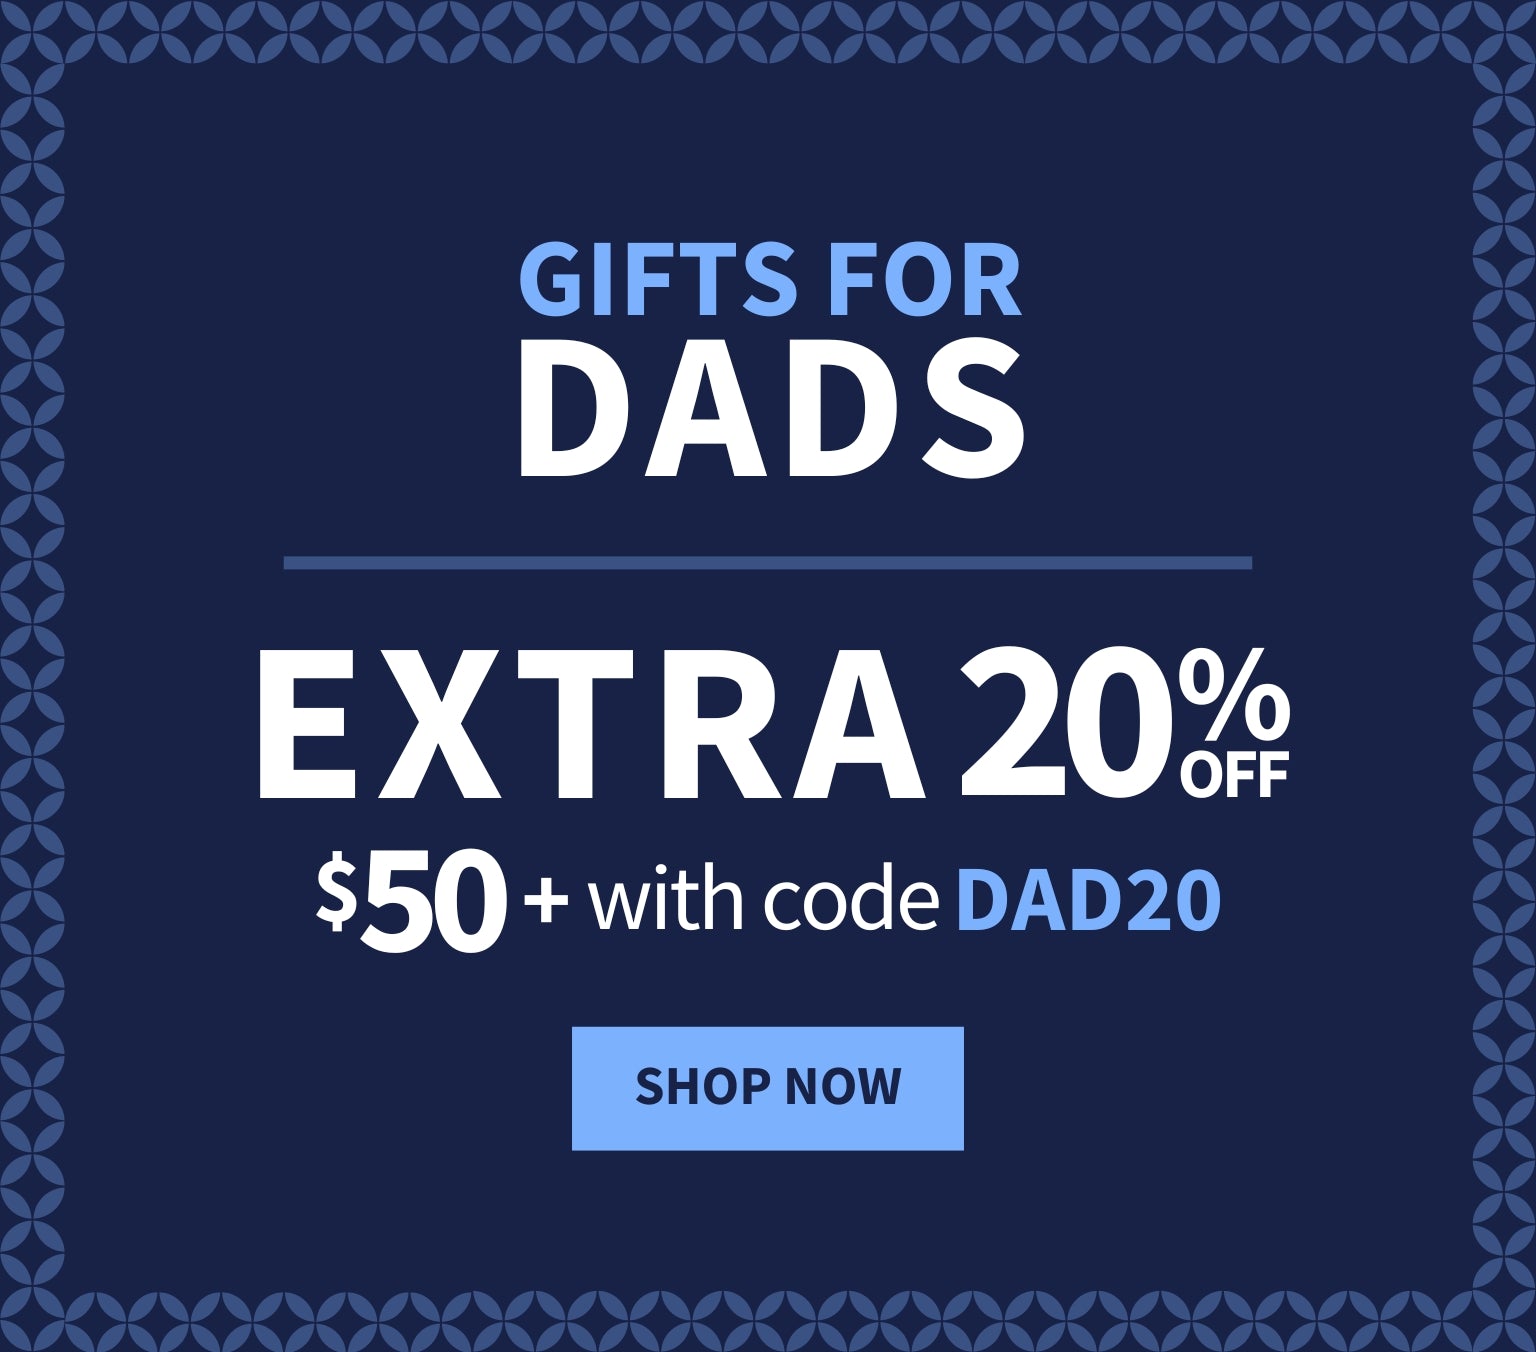 Gifts for Dads Extra 20% off $50 or more with code DAD20 Shop Now